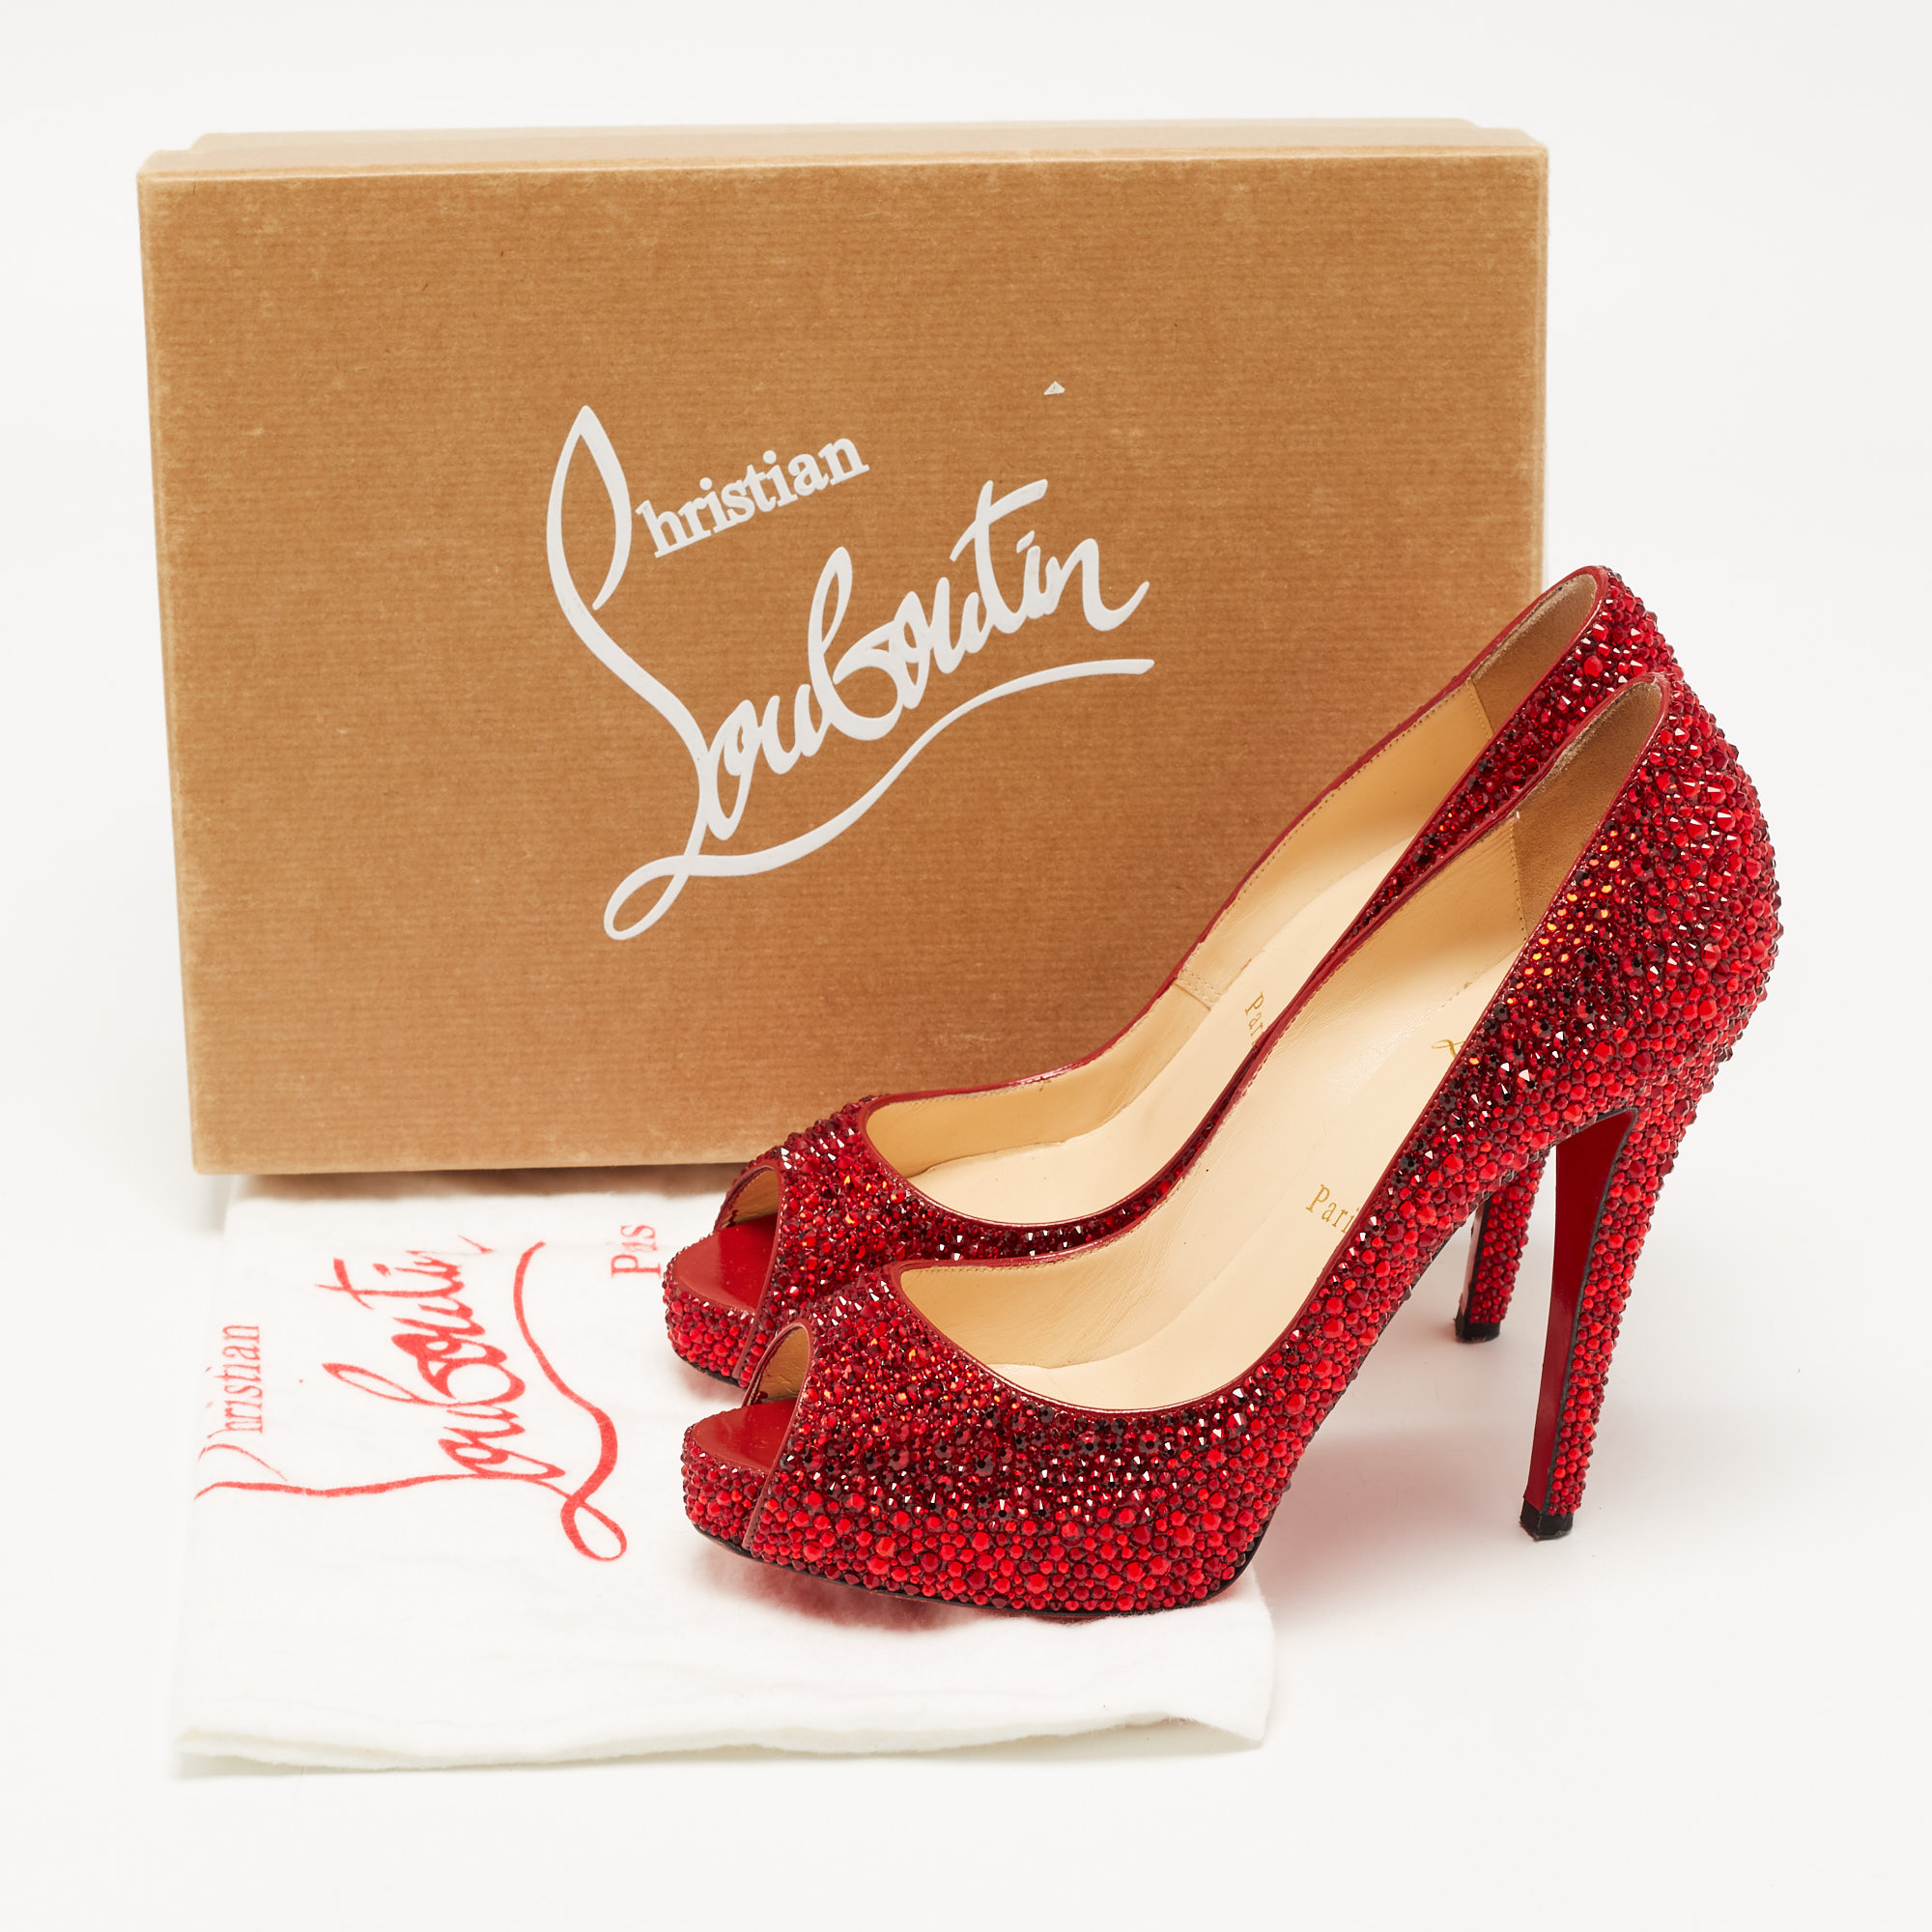 Christian Louboutin Red Leather Strass Very Prive Pumps Size 37.5